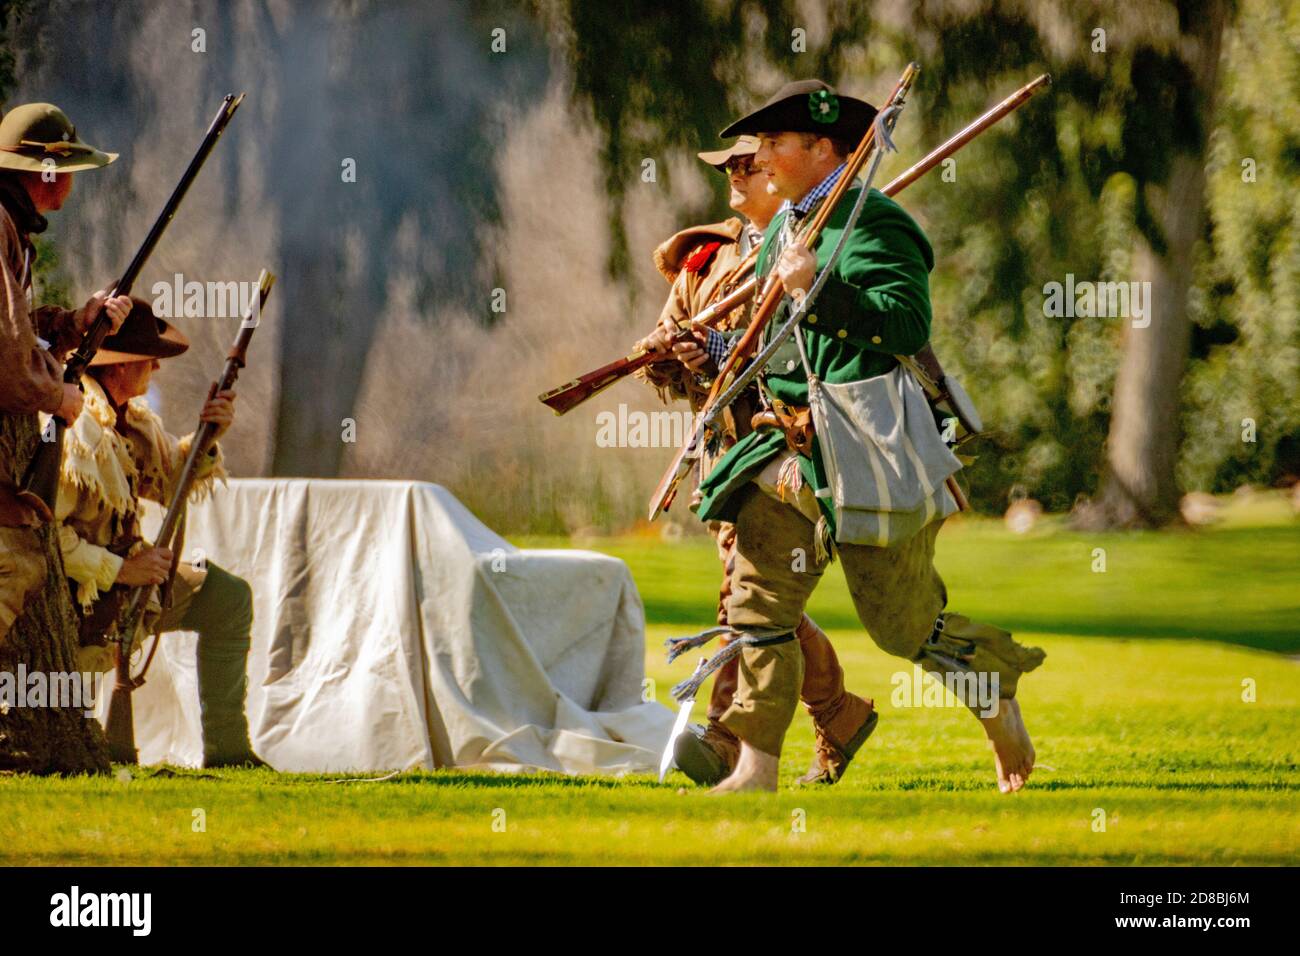 Rebel soldiers beat a hasty but temporary retreat at a historical reenactment of an American Revolutionary War battle in a Huntington Beach, CA, park. Stock Photo